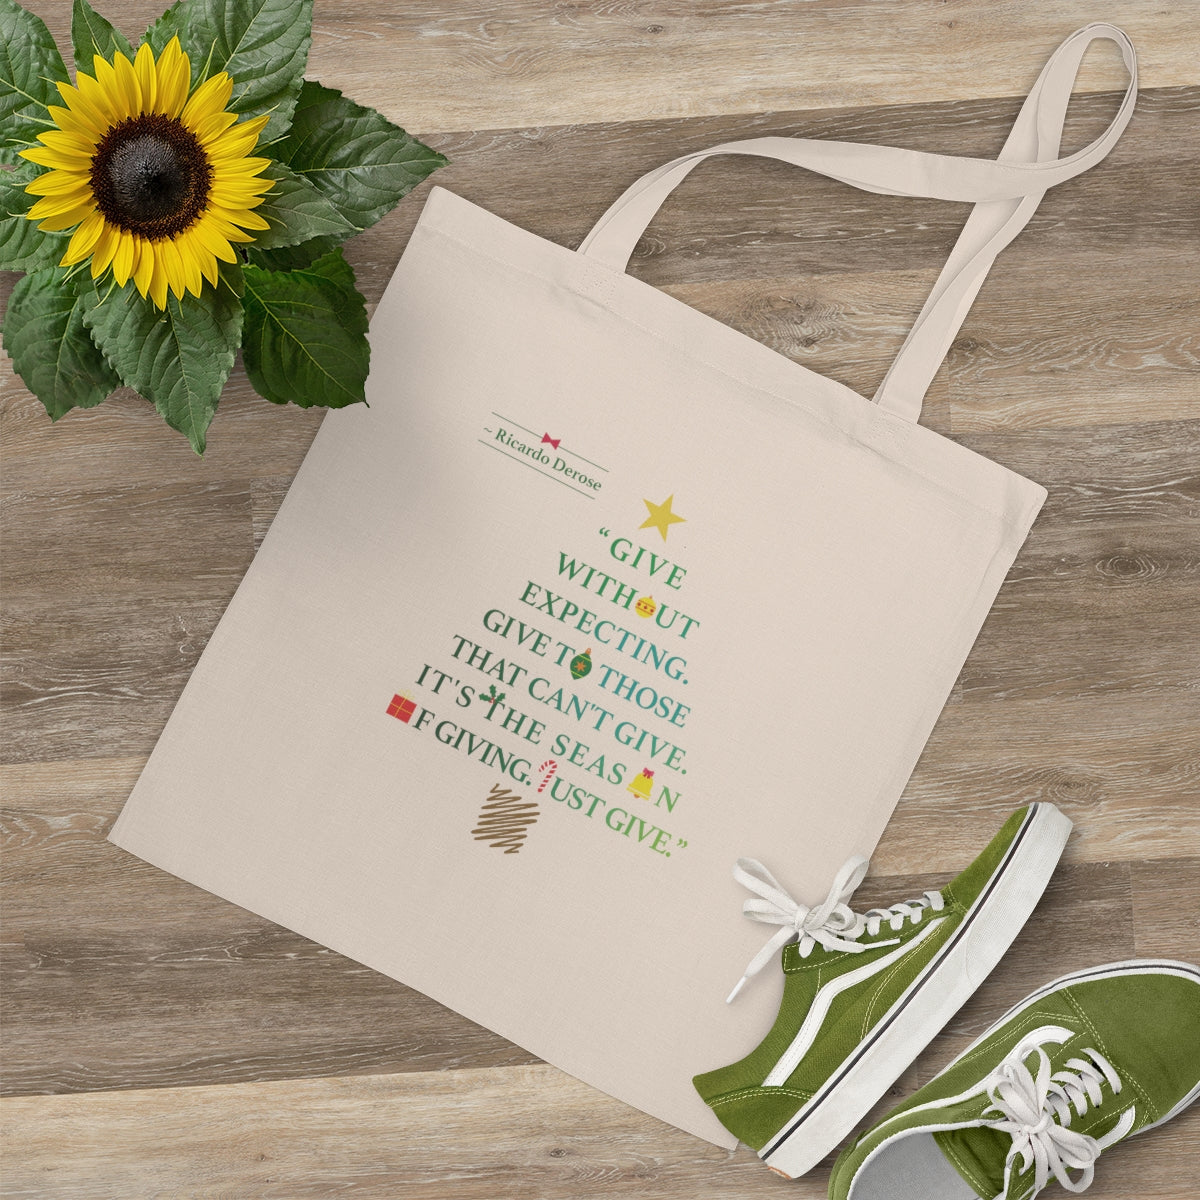 Give Without Expecting_from A Christmas Story_Tote Bag - Derose Entertainment 